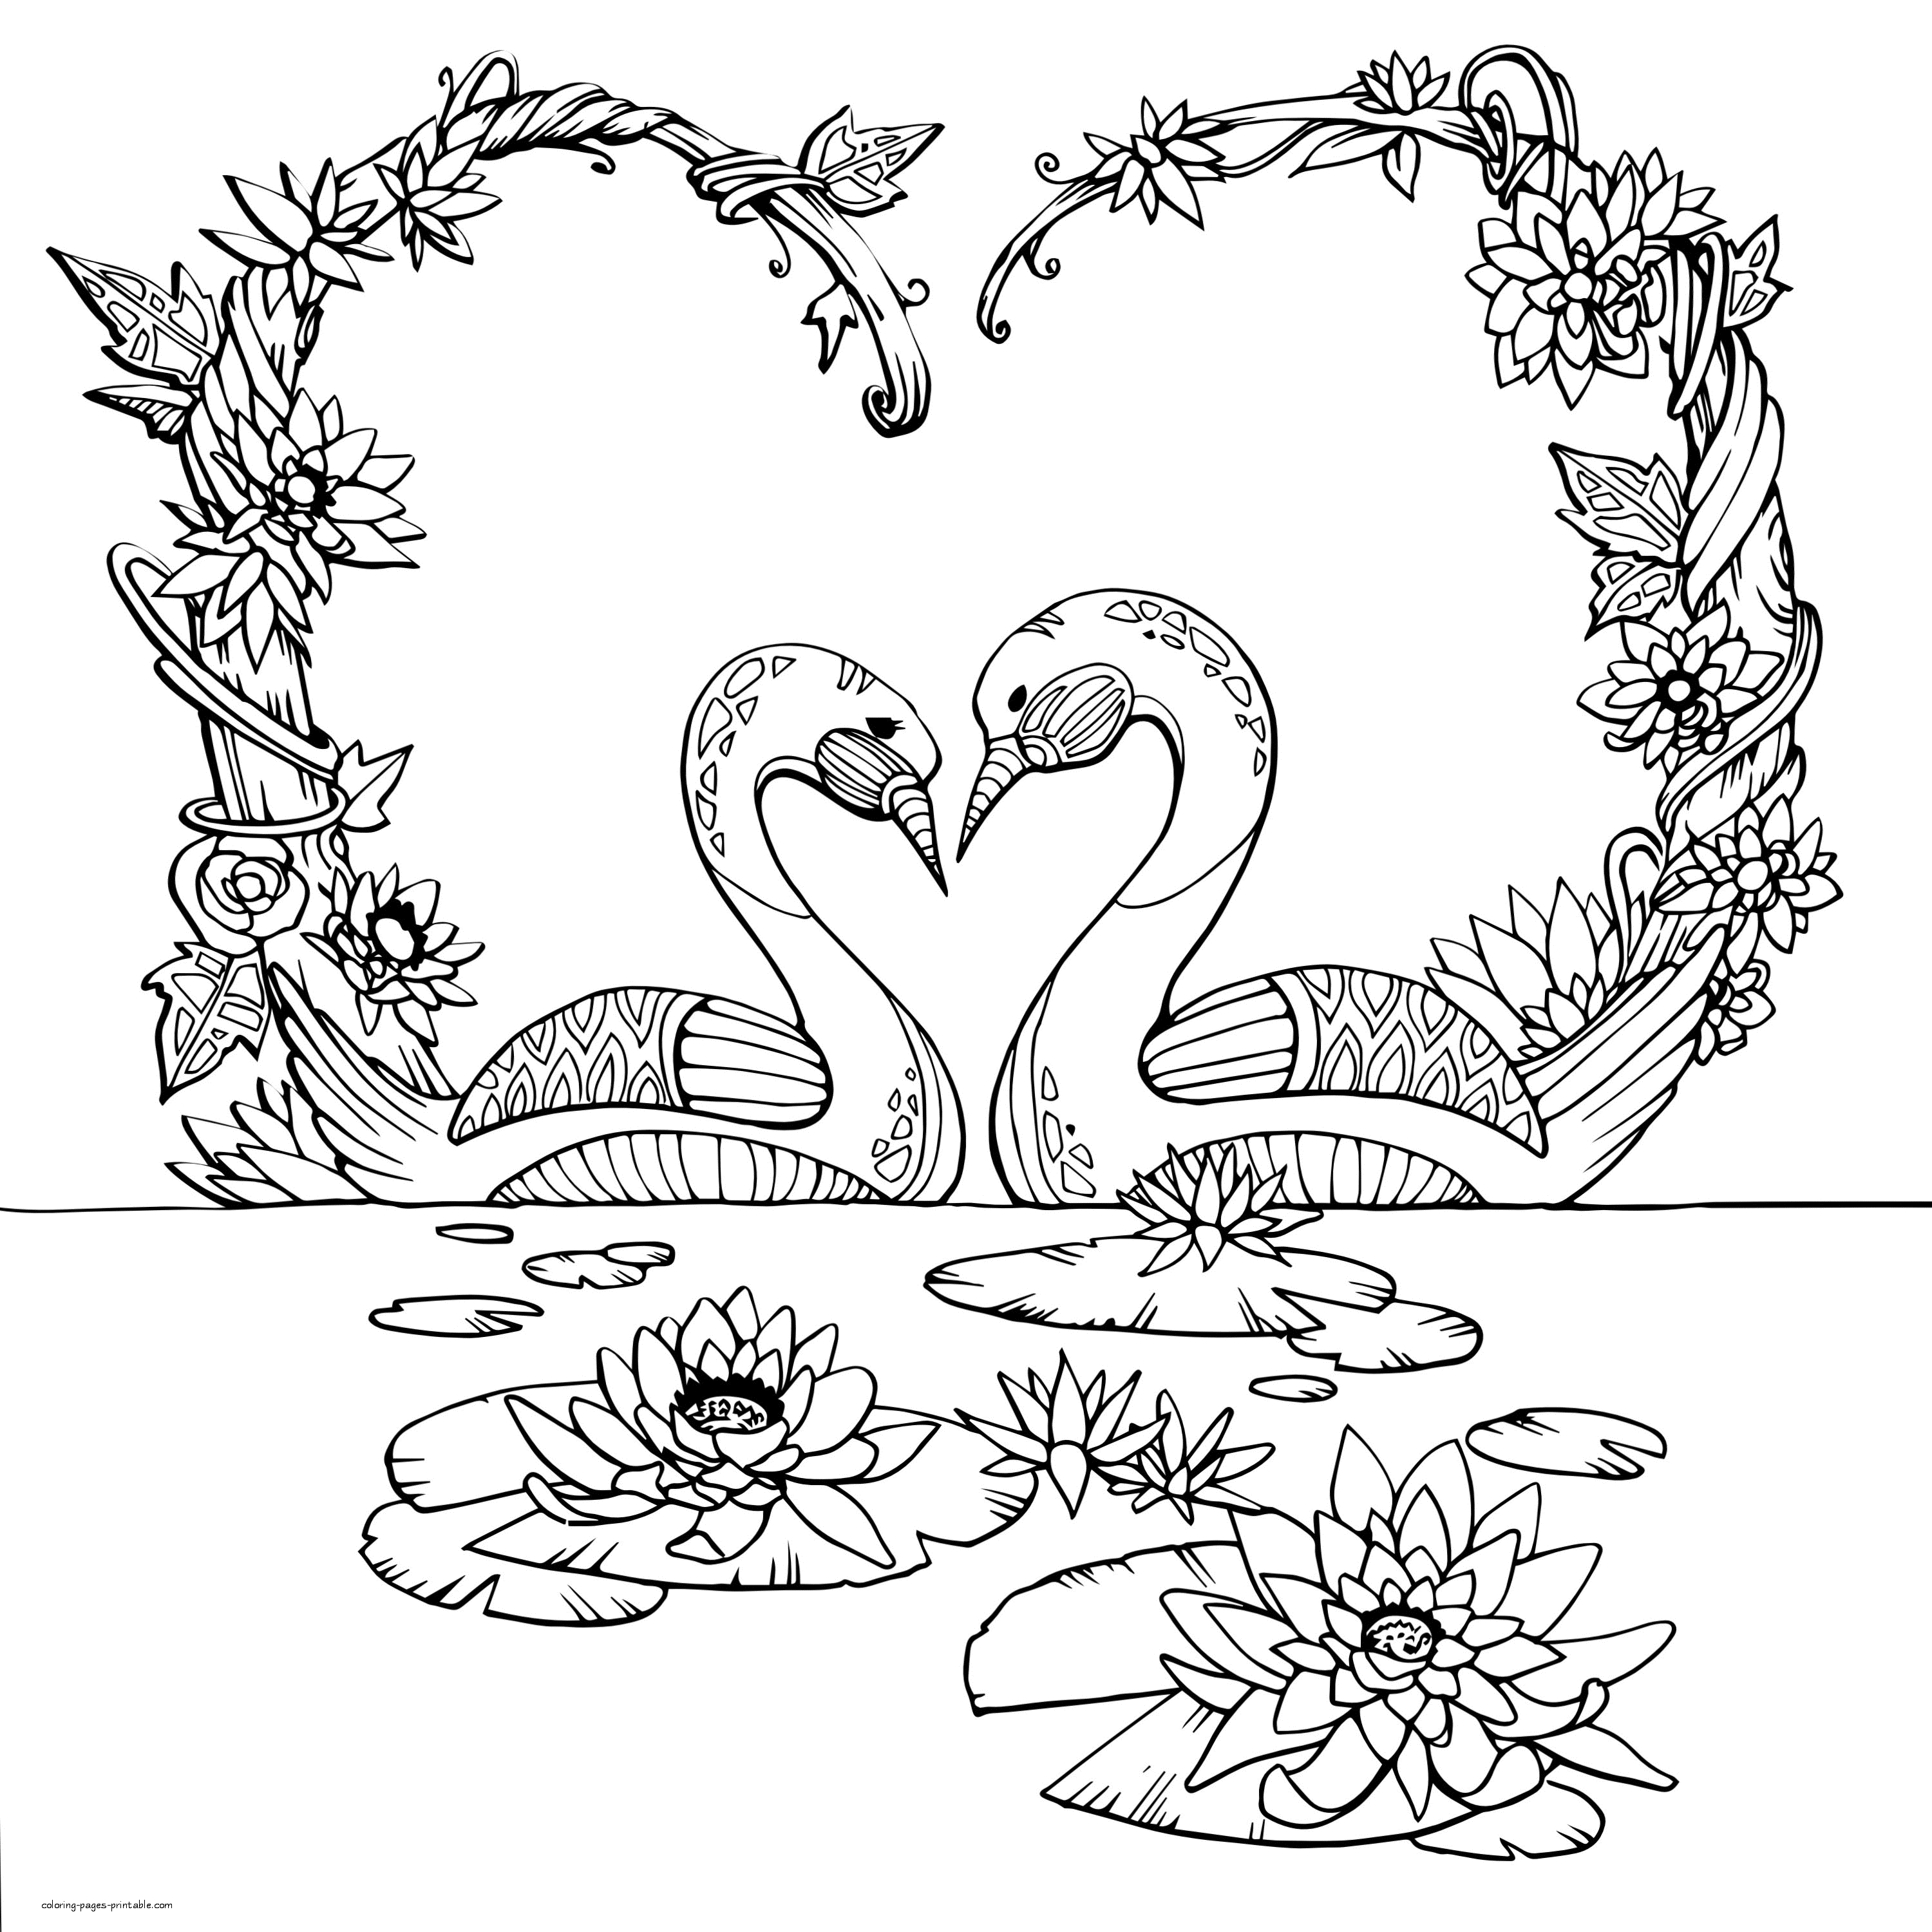 Pair Of Swans Coloring Page Coloring Pages Printablecom